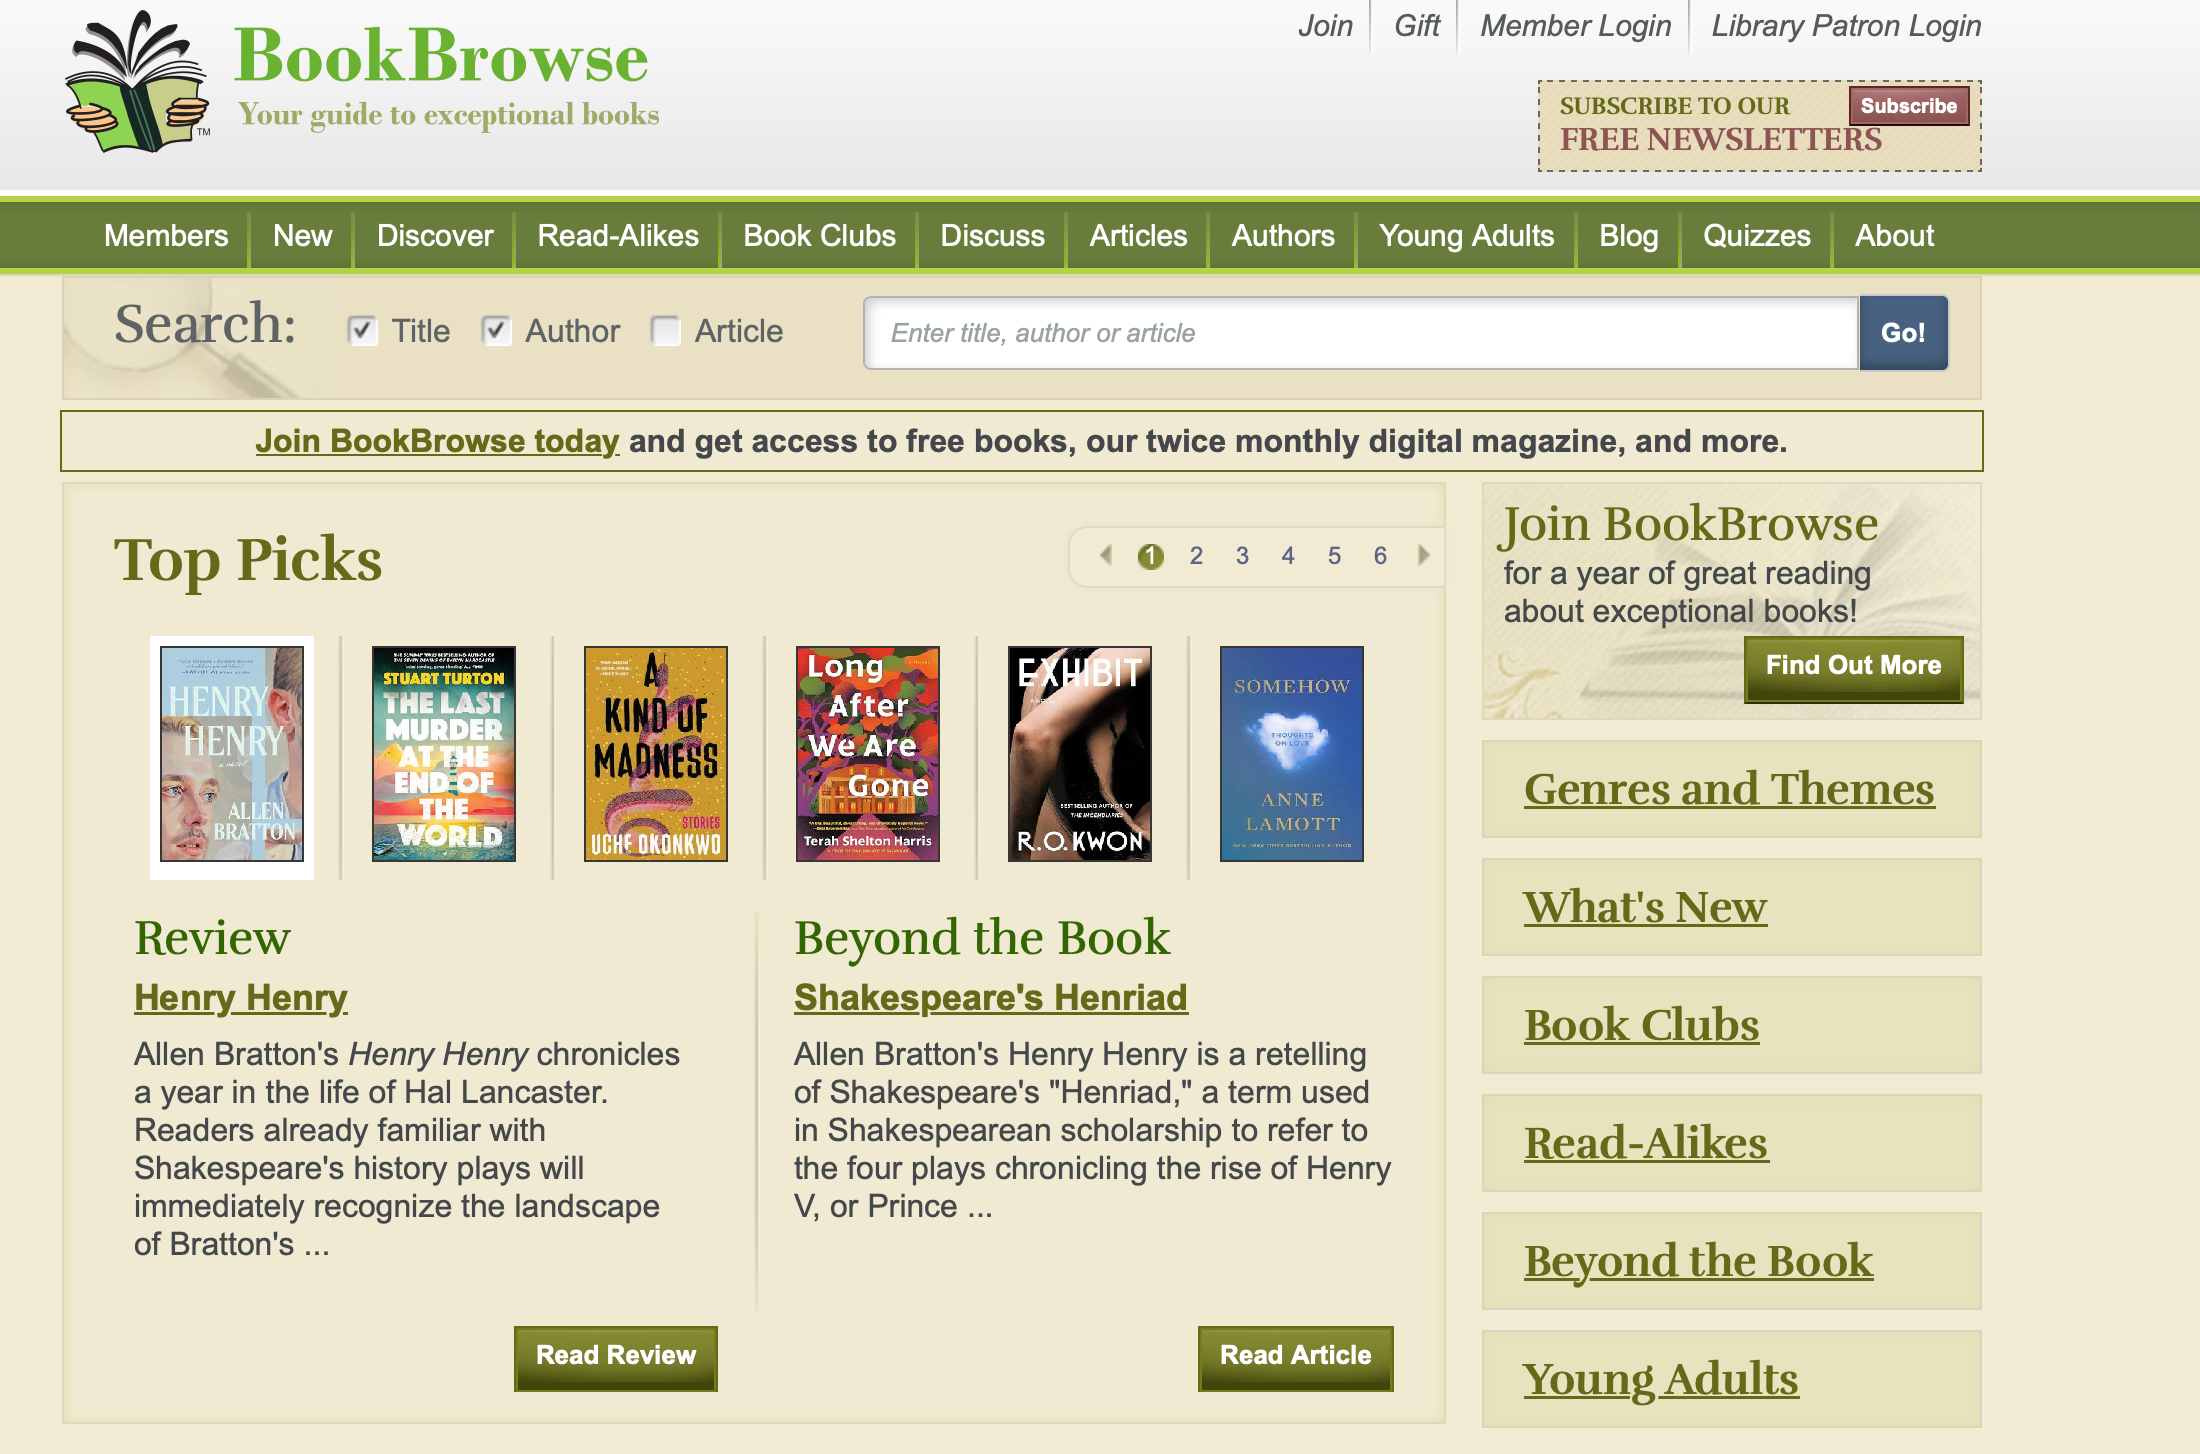 Screenshot of BookBrowse website homepage with top picks book recommendations